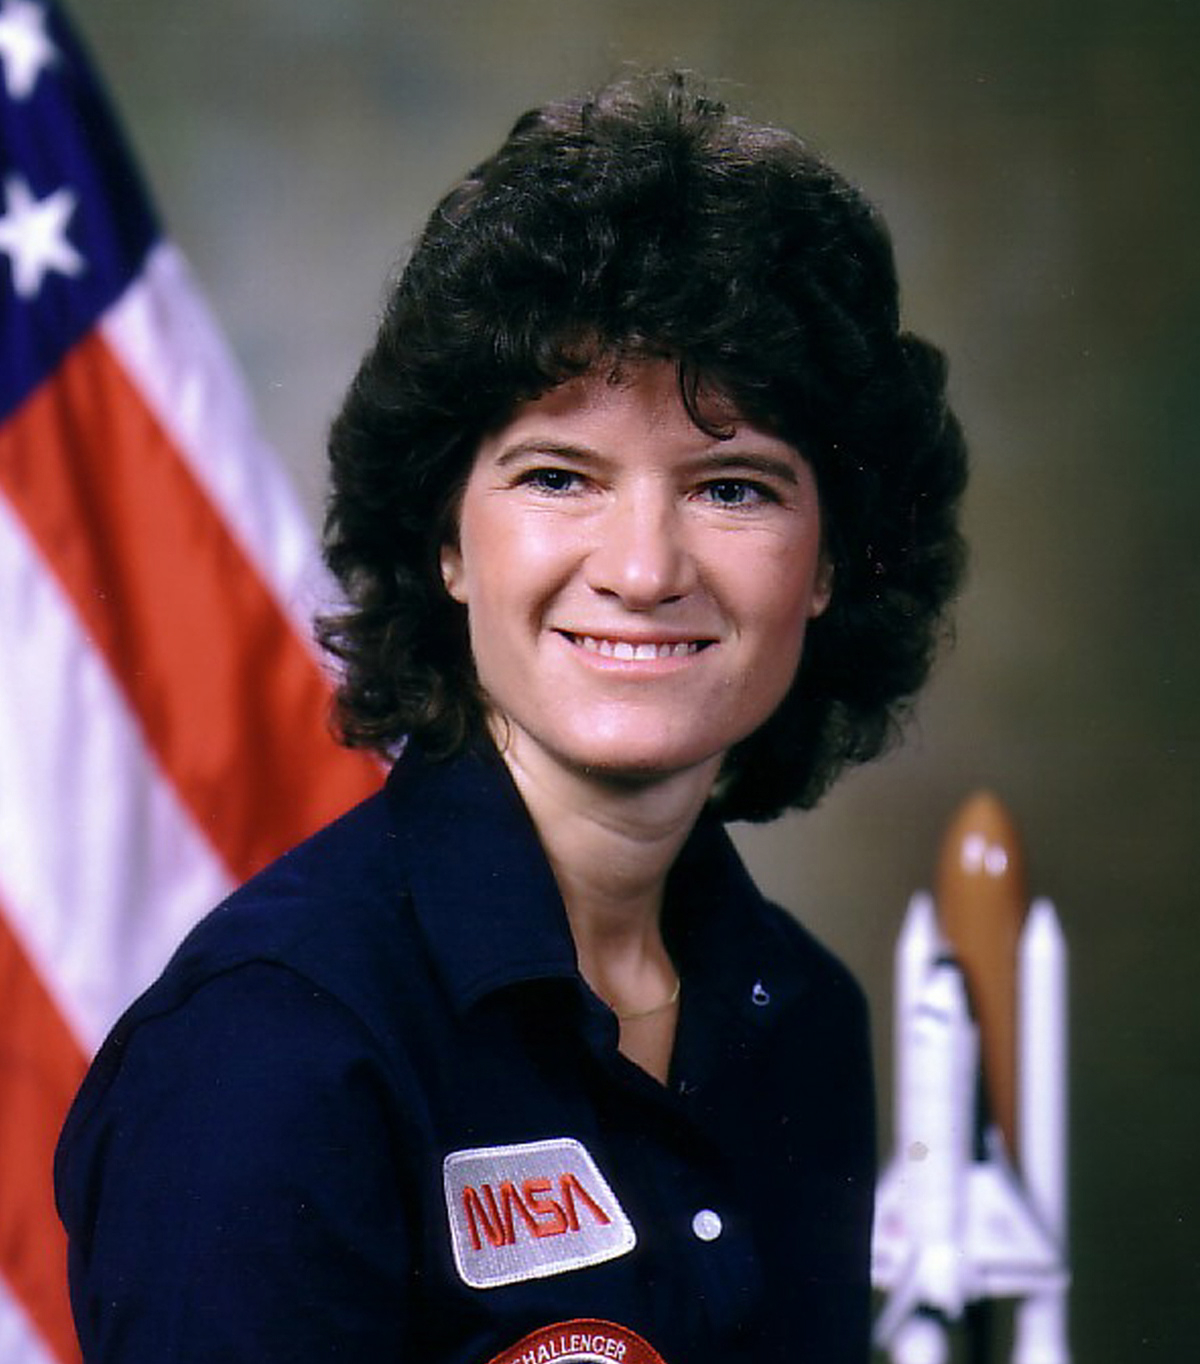 NASA
Astronaut Sally Ride was the first American woman in space.